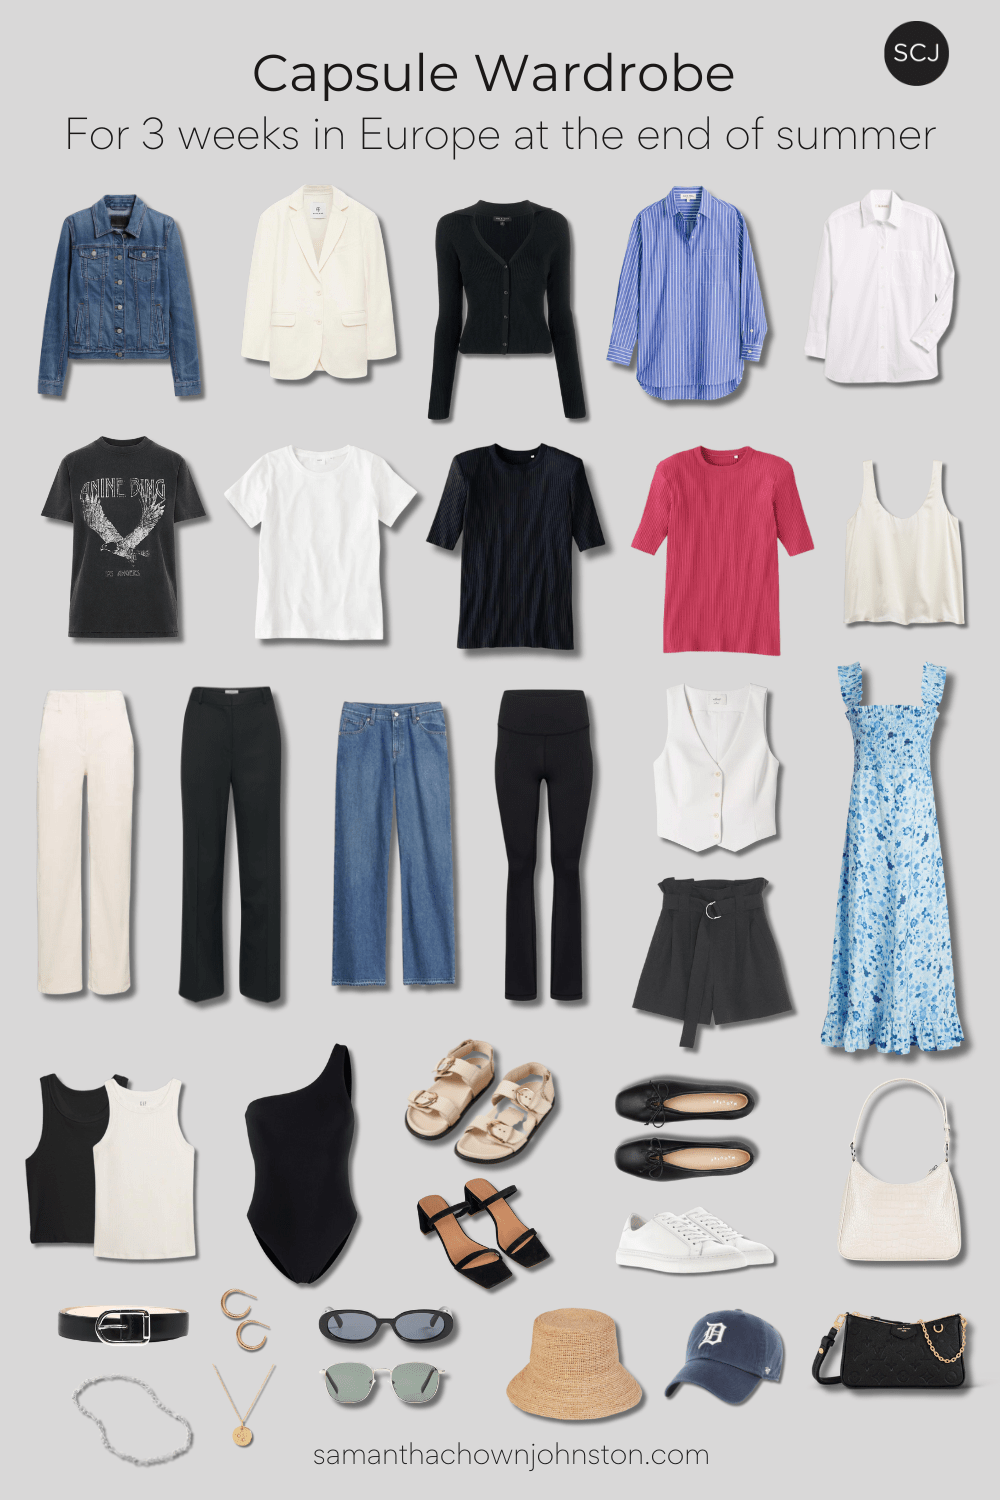 How to Build a Travel Capsule Wardrobe: Packing List & Tips